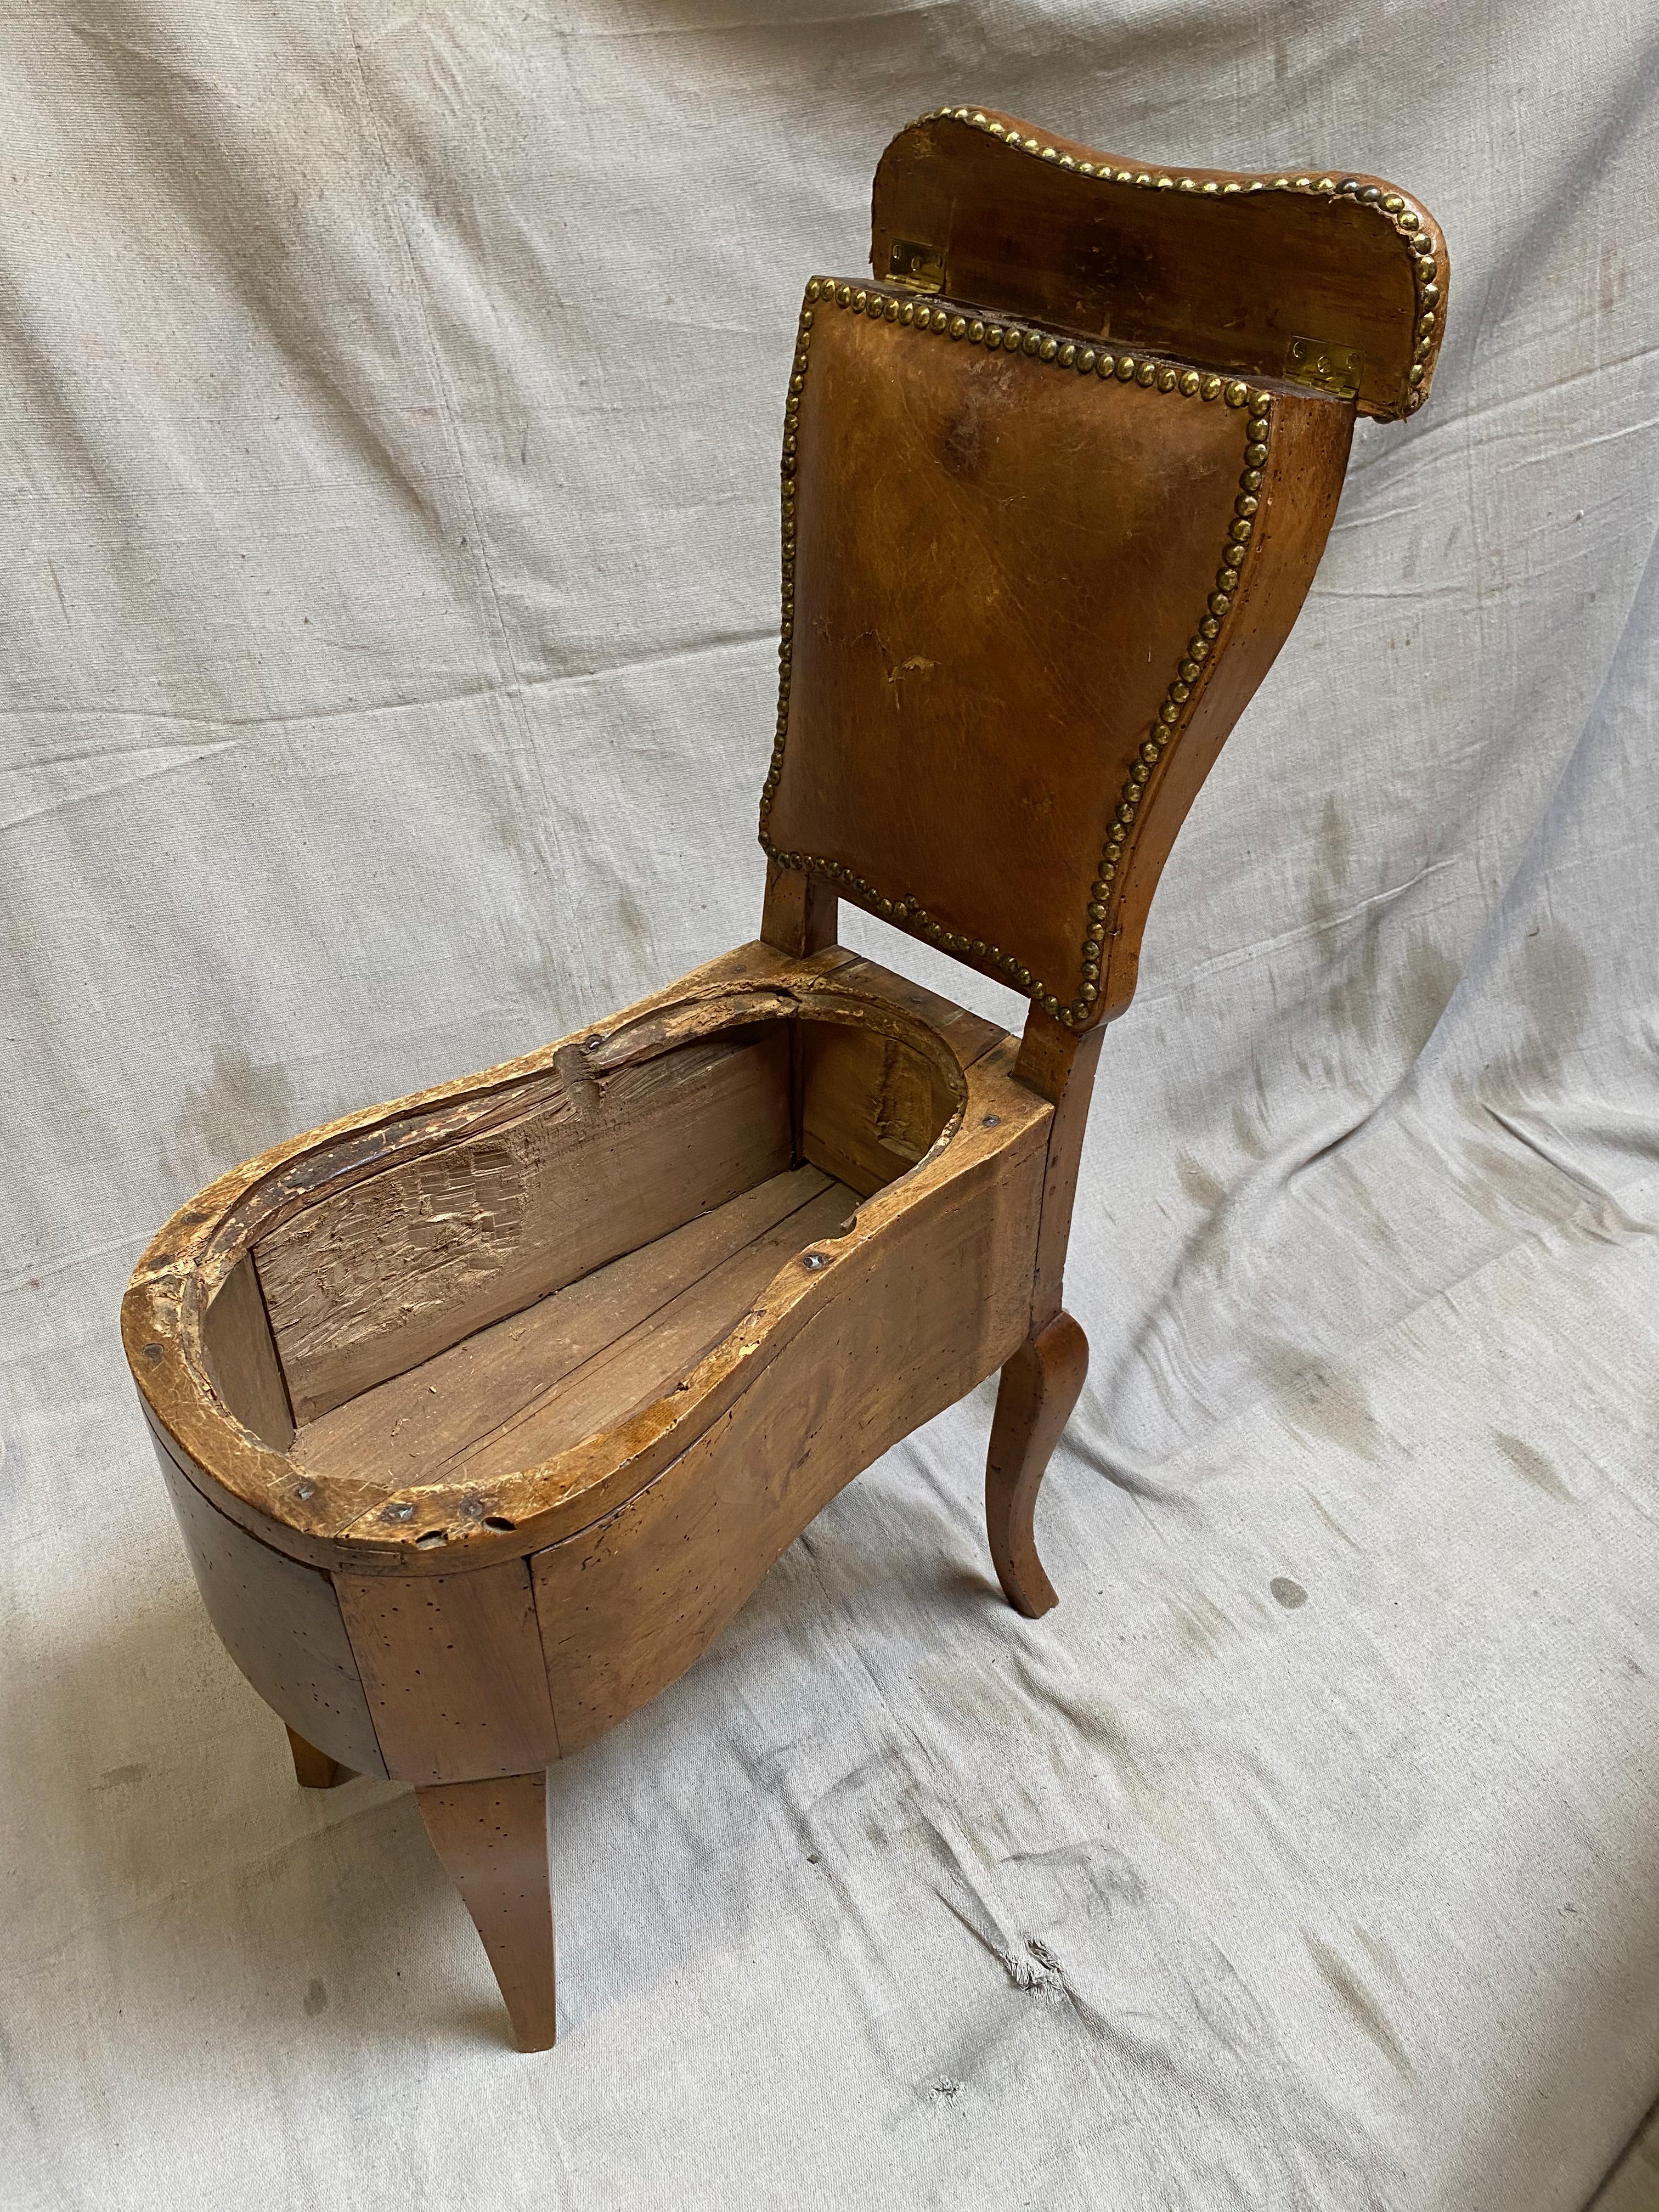 This magnificent piece of history, a French Louis XV-period (18th century) commode chair, meticulously crafted from high-quality beechwood with brass tack-bound leather over back padding. This antique chair has been immaculately preserved and is in